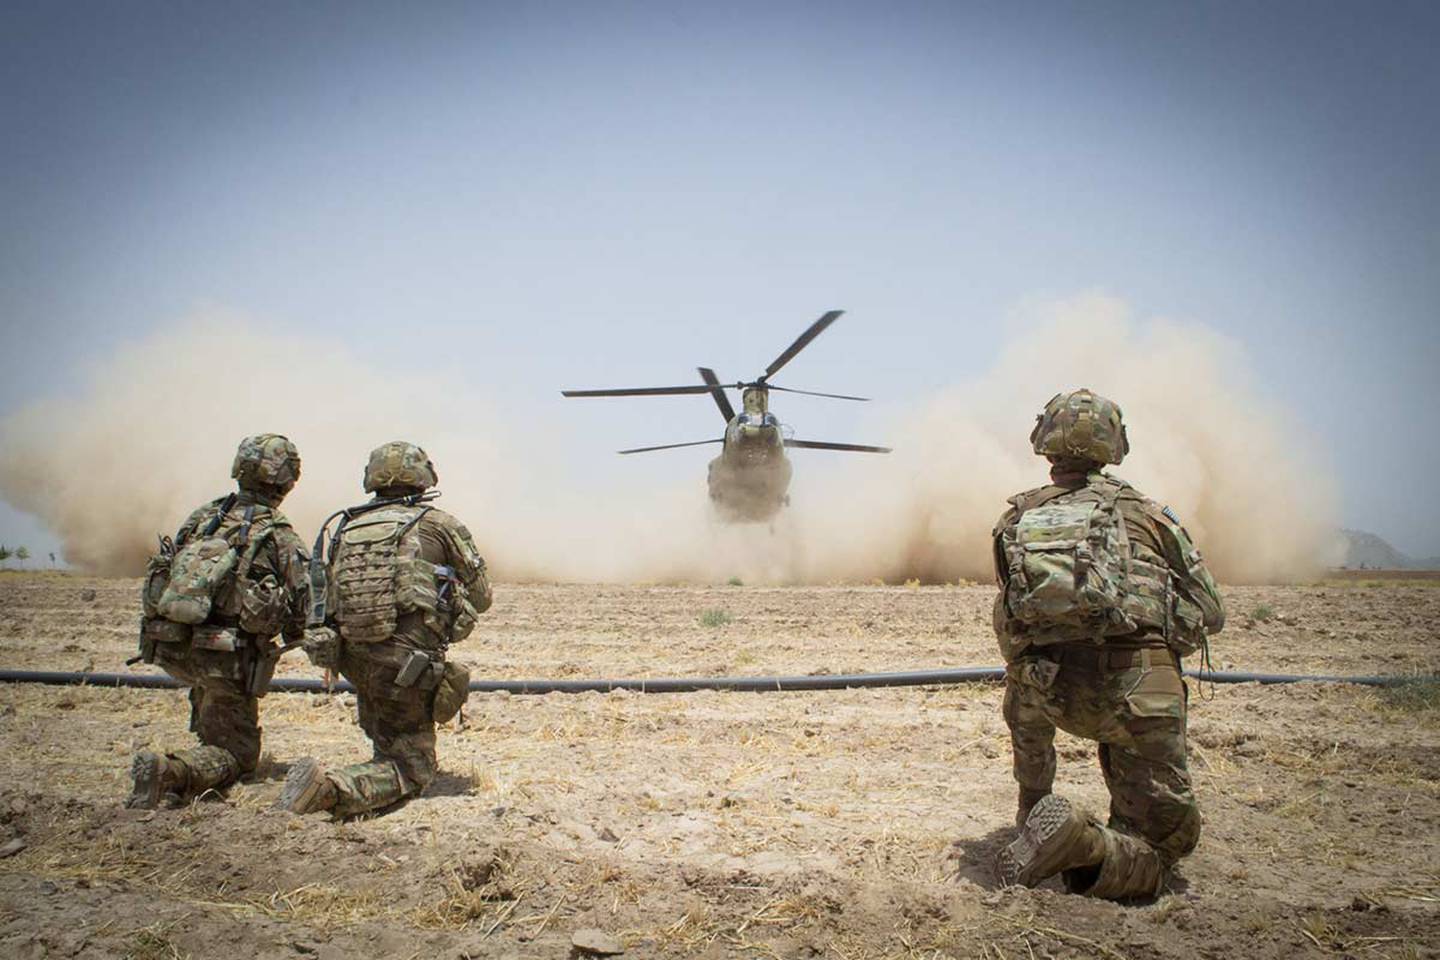 Paratroopers secure a helicopter landing zone for a CH-47 Chinook helicopter, July 20, 2019, in Kandahar Province, Afghanistan.